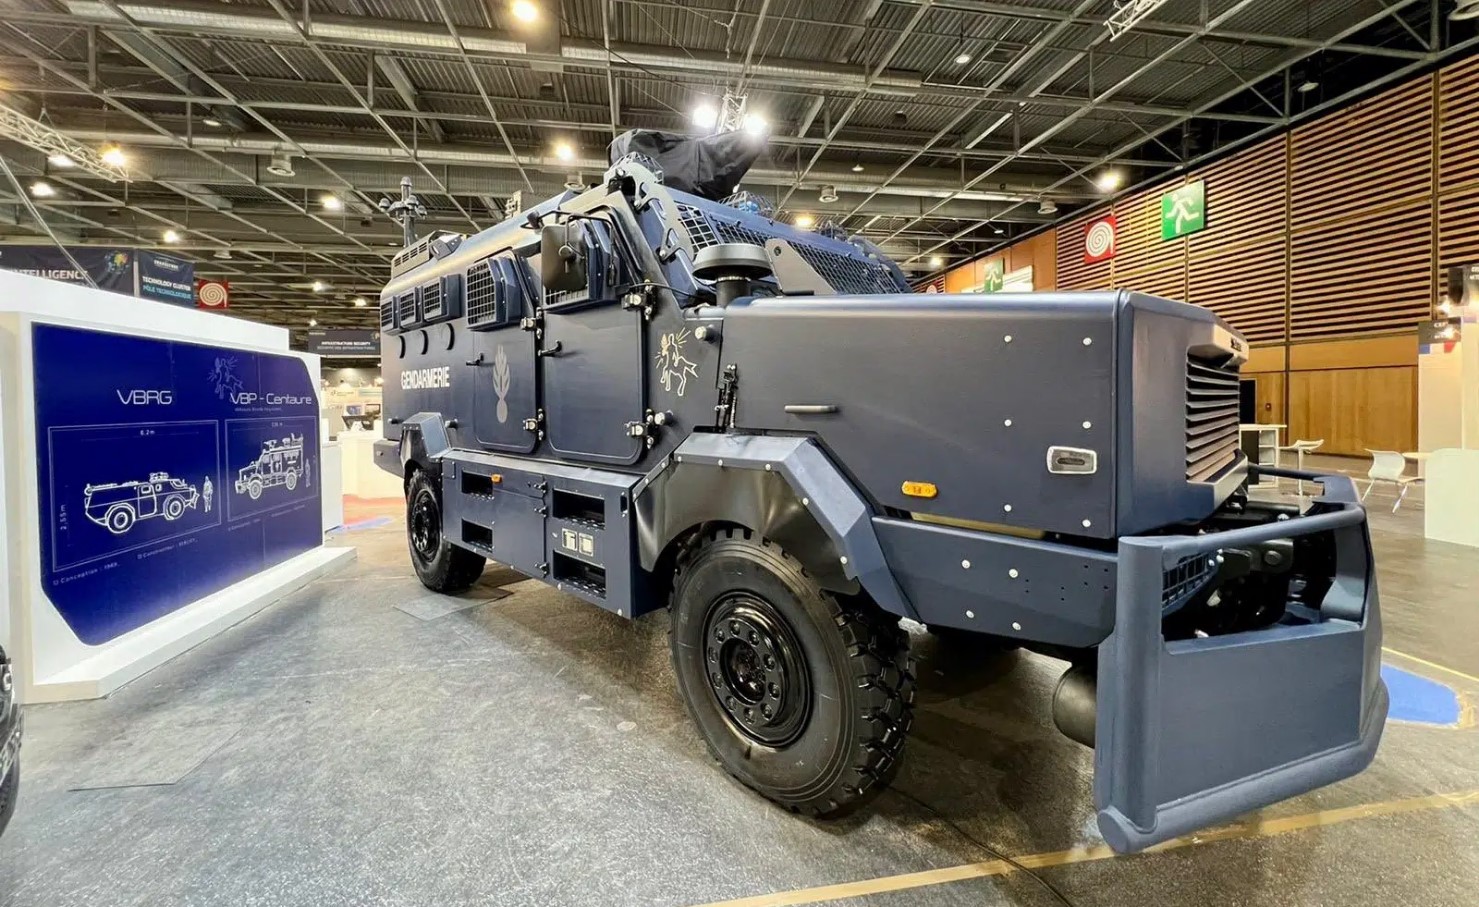 Gendarmerie nationale: the new armoured vehicle “Centaure” exhibited at Eurosatory